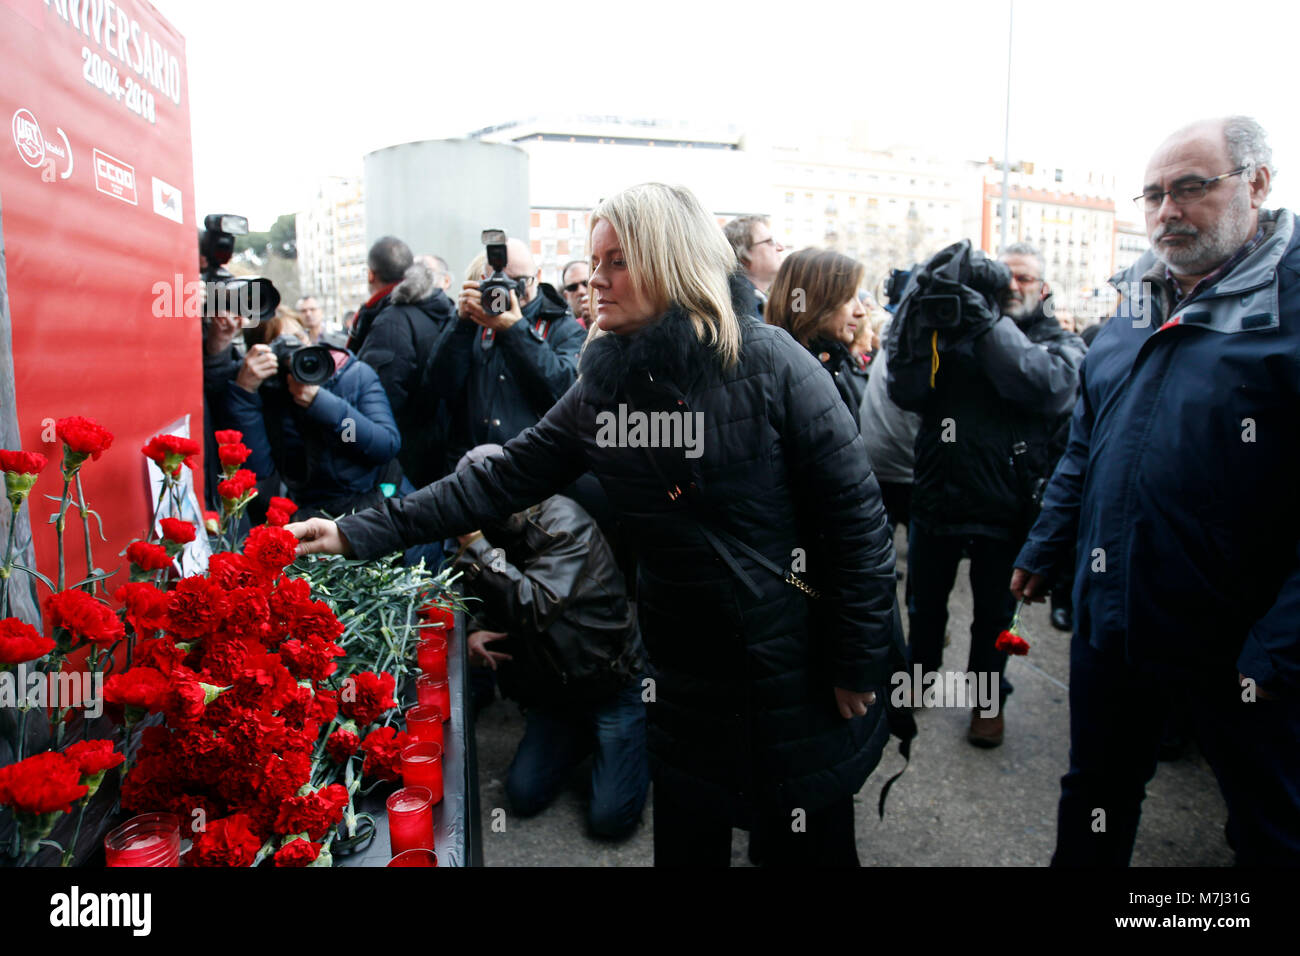 Madrid, Spain. 11th March, 2018. during a tribute in memory of the victims of the attack of 11-M 2004, at the train station of Atocha on Sunday 11 March 2018. Credit: Gtres Información más Comuniación on line, S.L./Alamy Live News Stock Photo